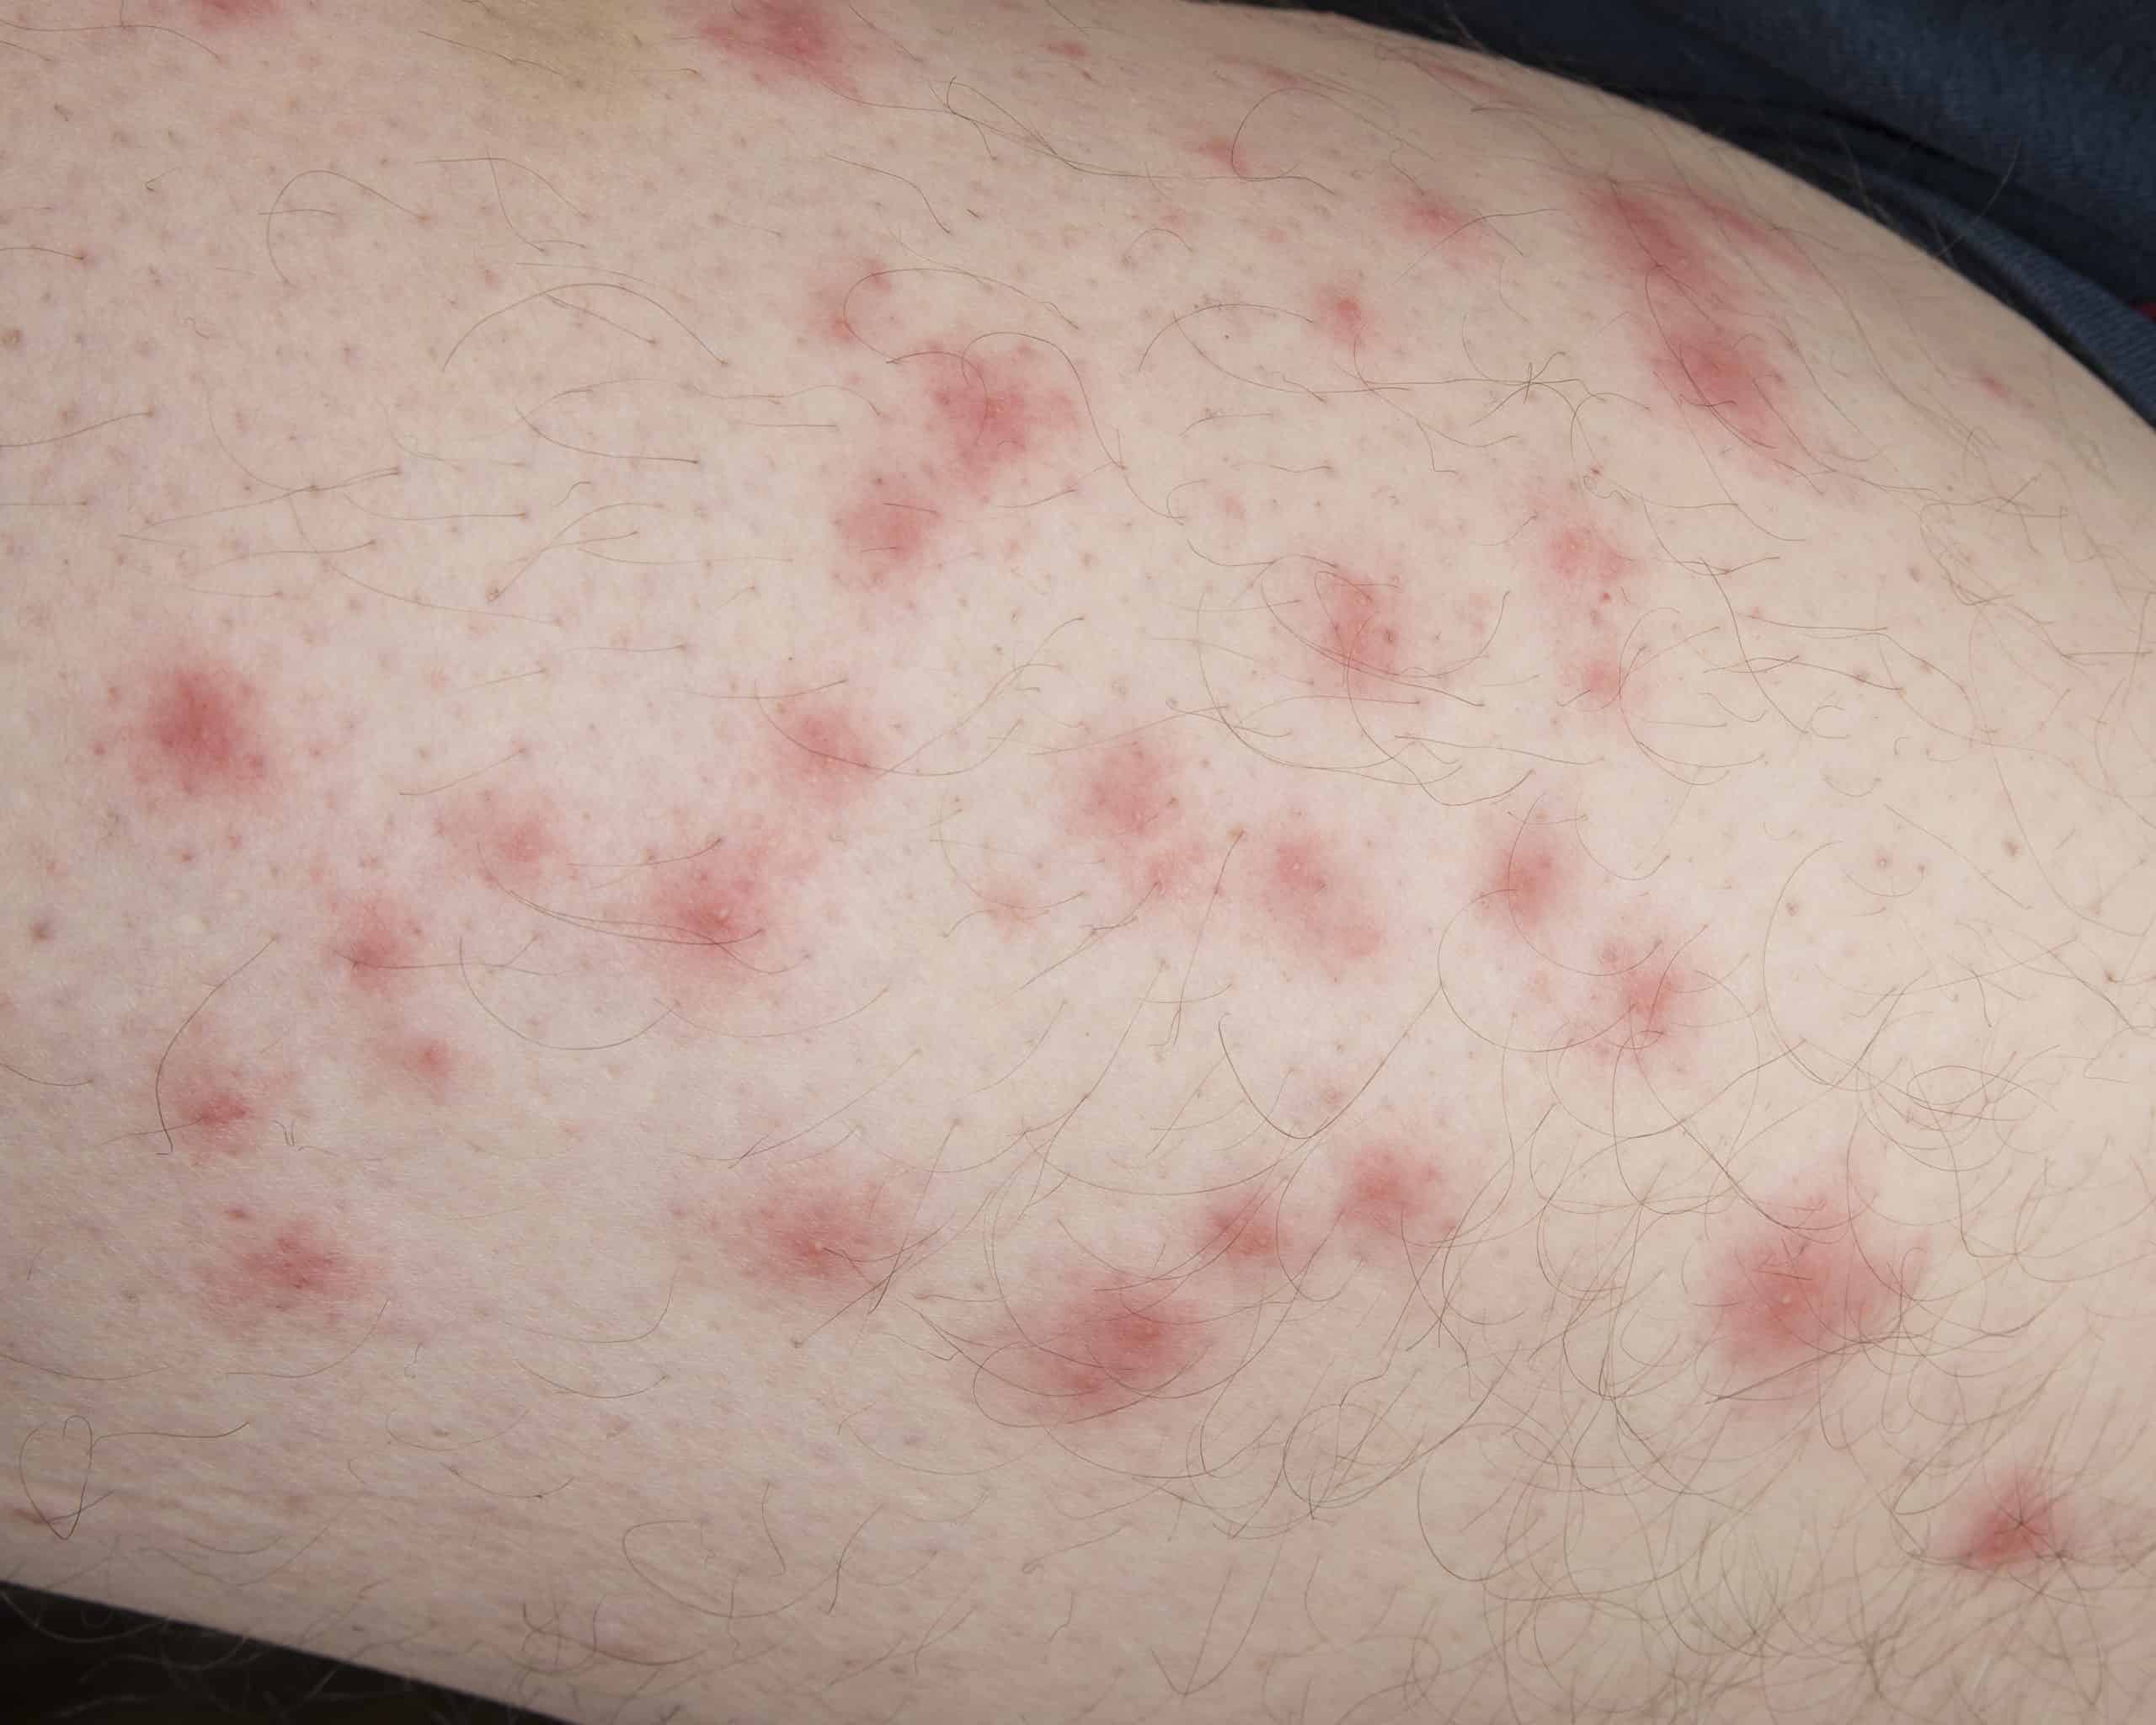 Bites of insect on male body. Bed bugs or flea. - Green Pest Services